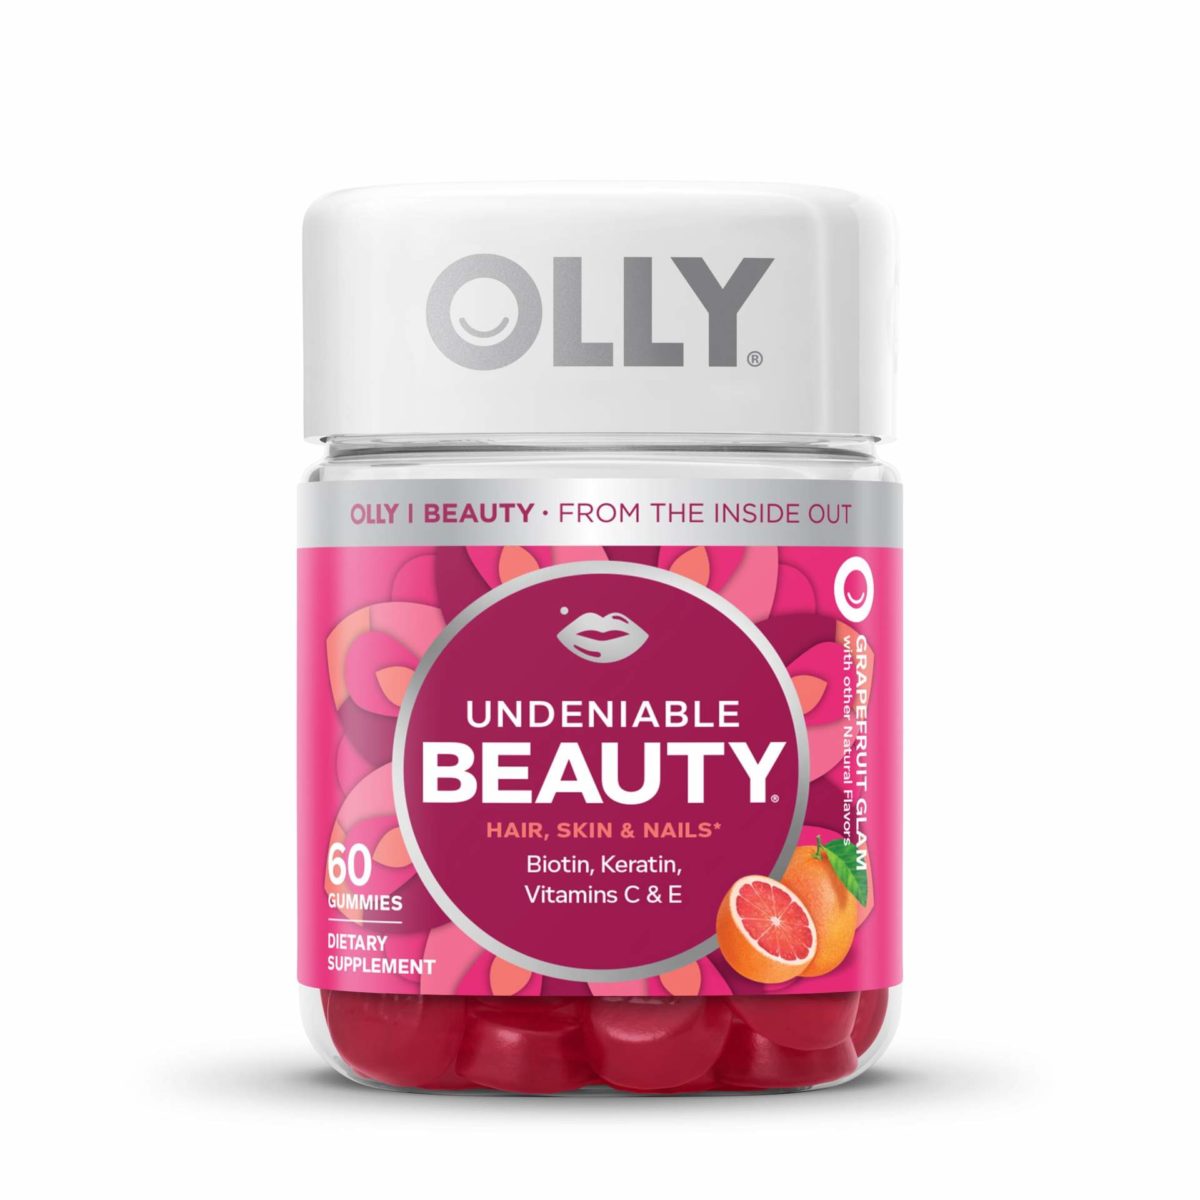 olly undeniable beauty reviews